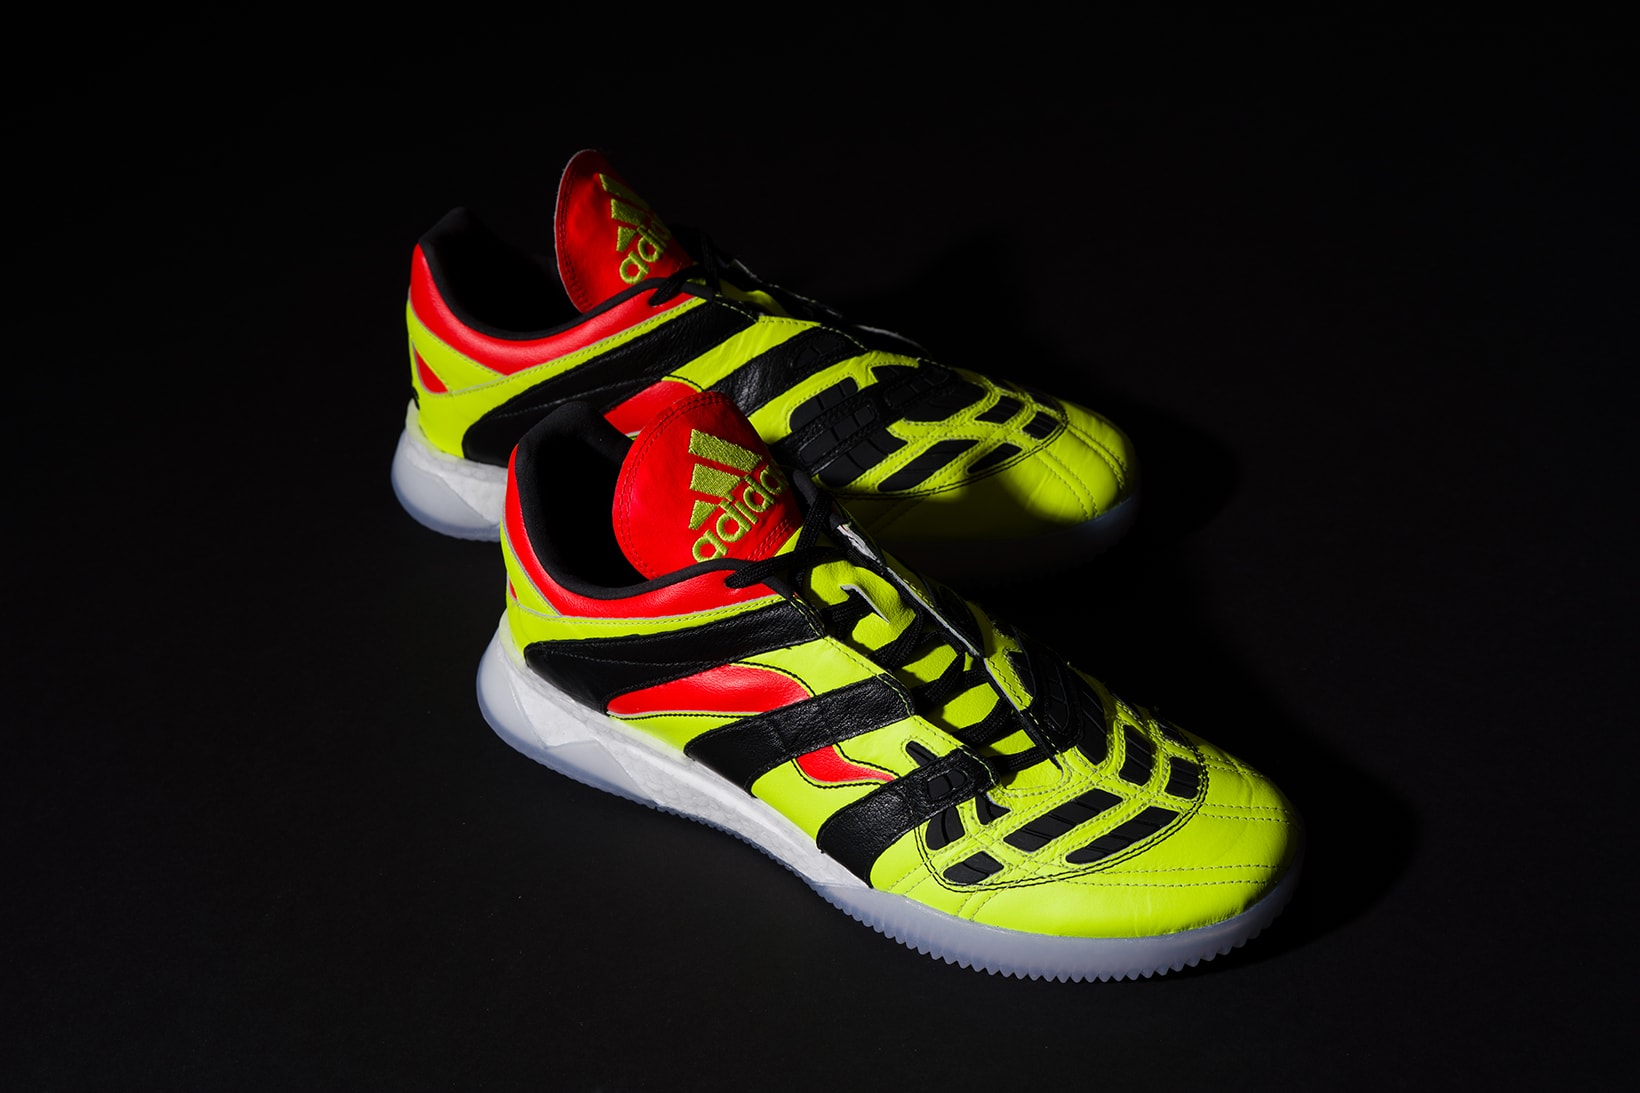 Adidas Predator Accelerato S Yellow Details Sneakers Kicks Shoes Trainers Boots Cop Purchase Buy Available Now Closer Look David Beckham Deadstock Zinedine Zidane